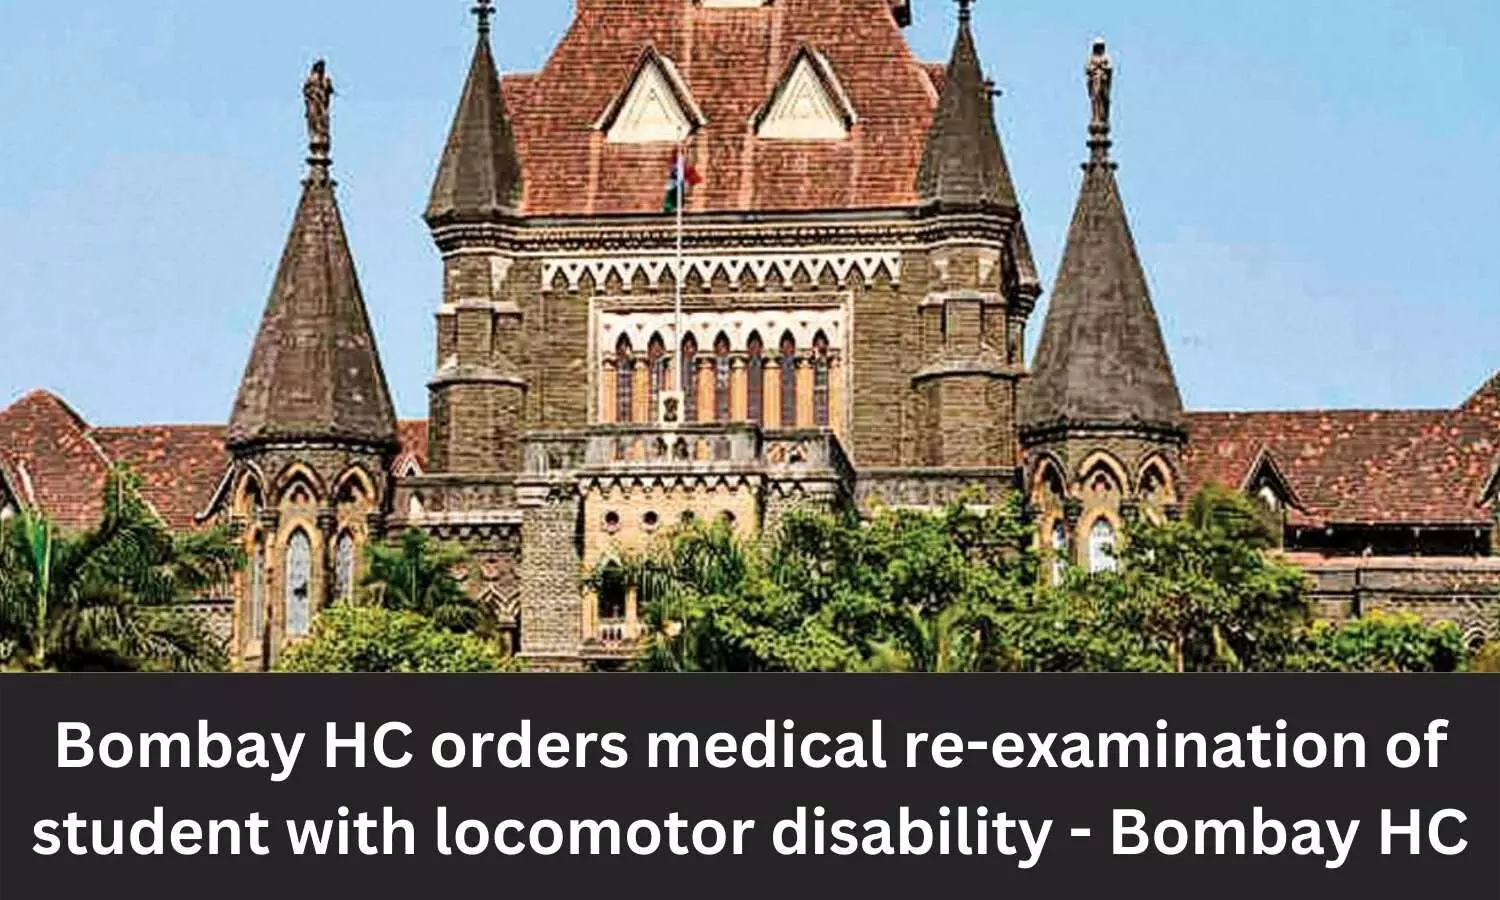 MBBS Admission: Bombay HC orders medical re-examination of student with locomotor disability